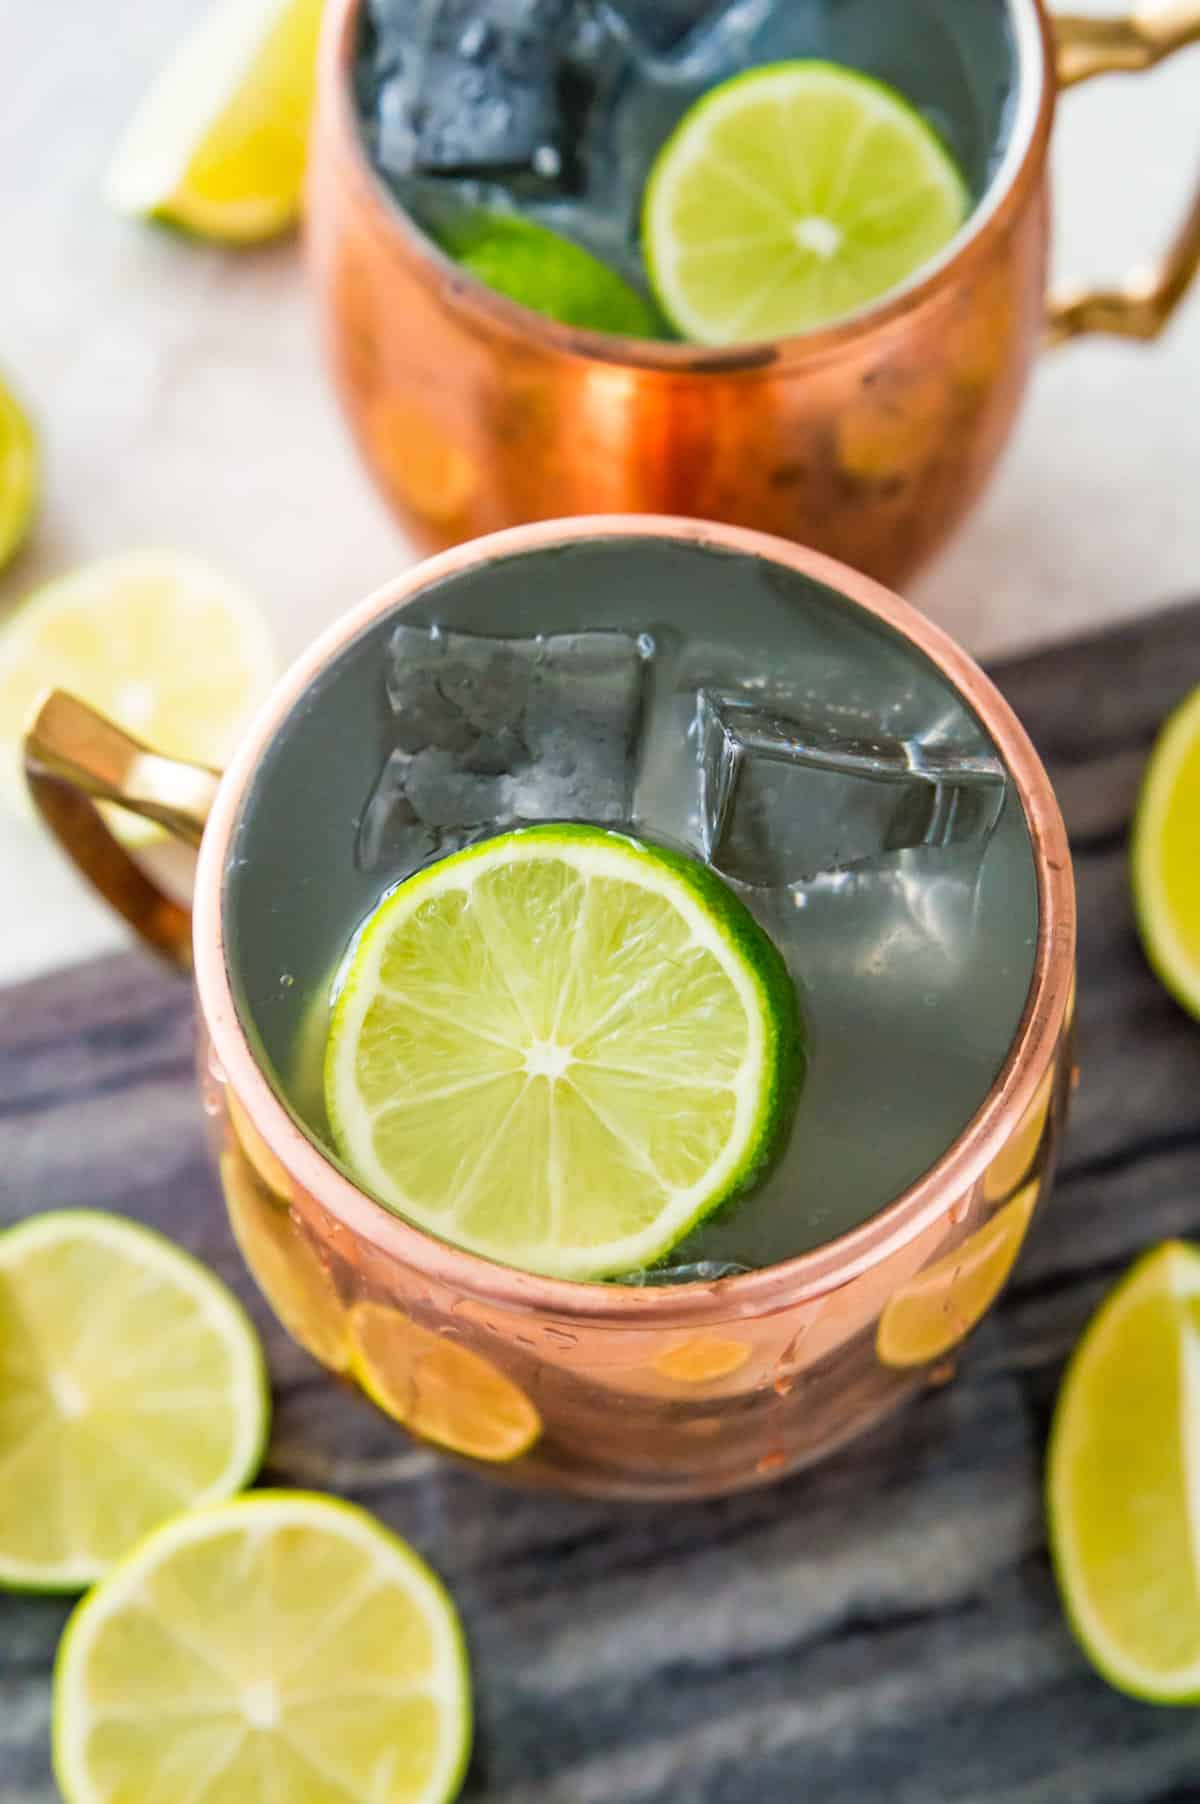 A virgin Moscow mule in a copper mug with ice and lime slices in it.